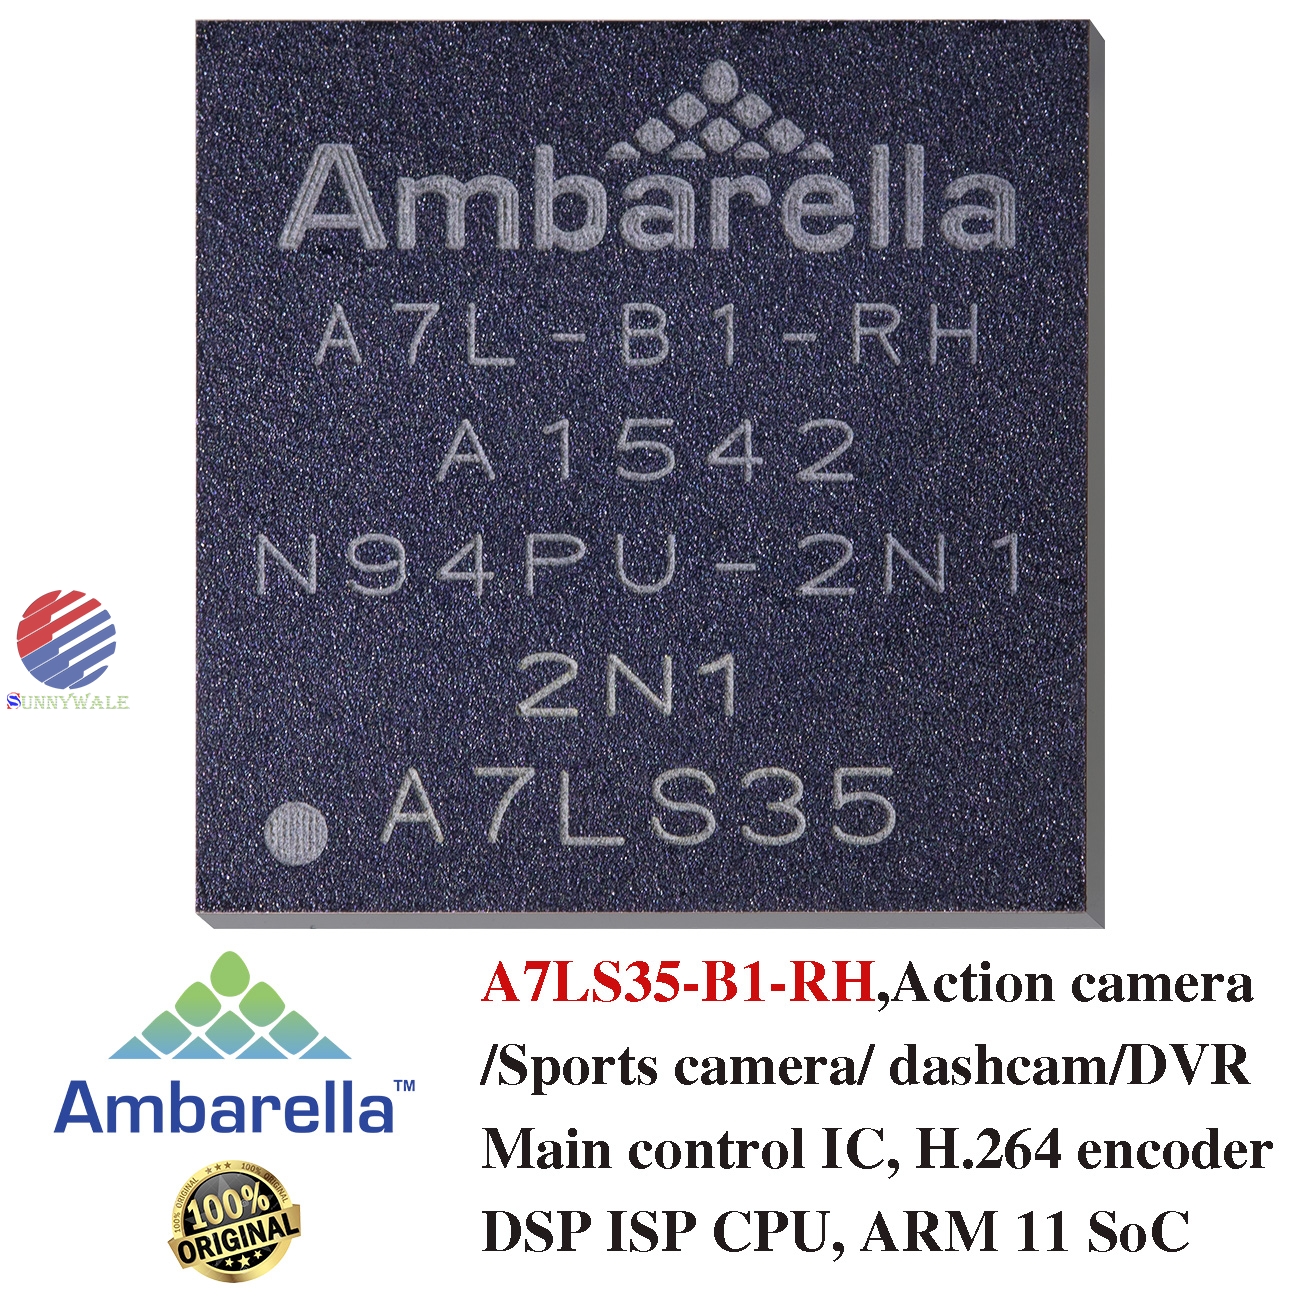 A7LS35, 1080p@60fps Image processor, H.264 encoder, ARM11 SoC, Ambarella, solution for sports camera, vehicle driving recorder, police law enforcement recorder, security surveillance camera